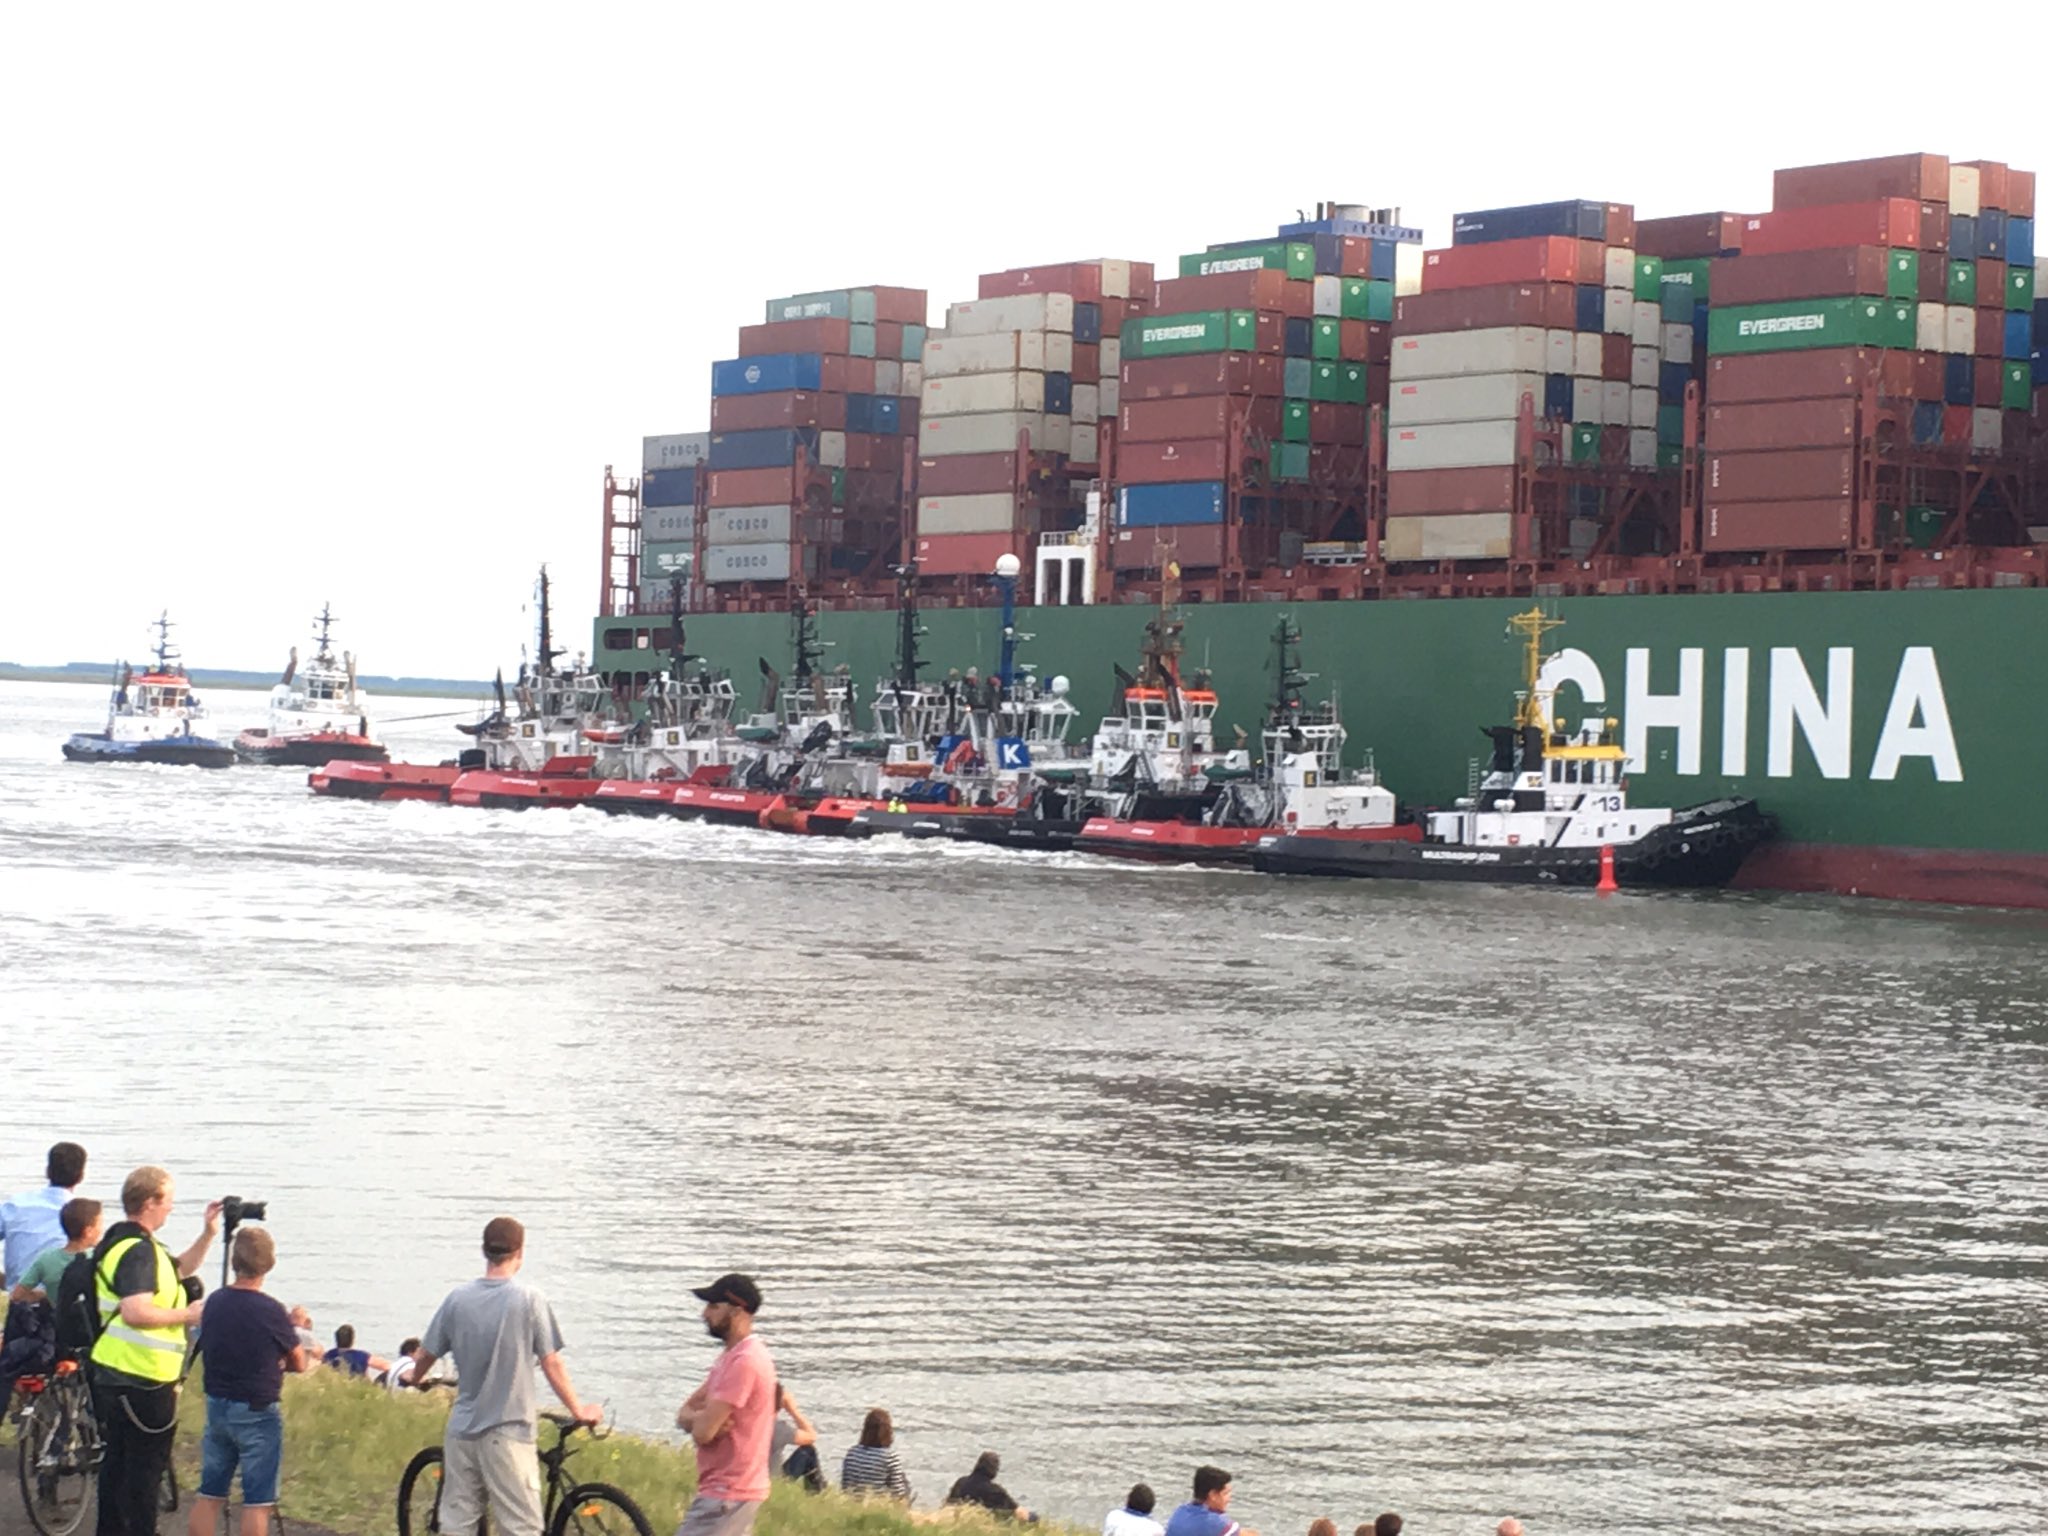 WATCH: AIS Animation Shows CSCL Jupiter Grounding and Salvage